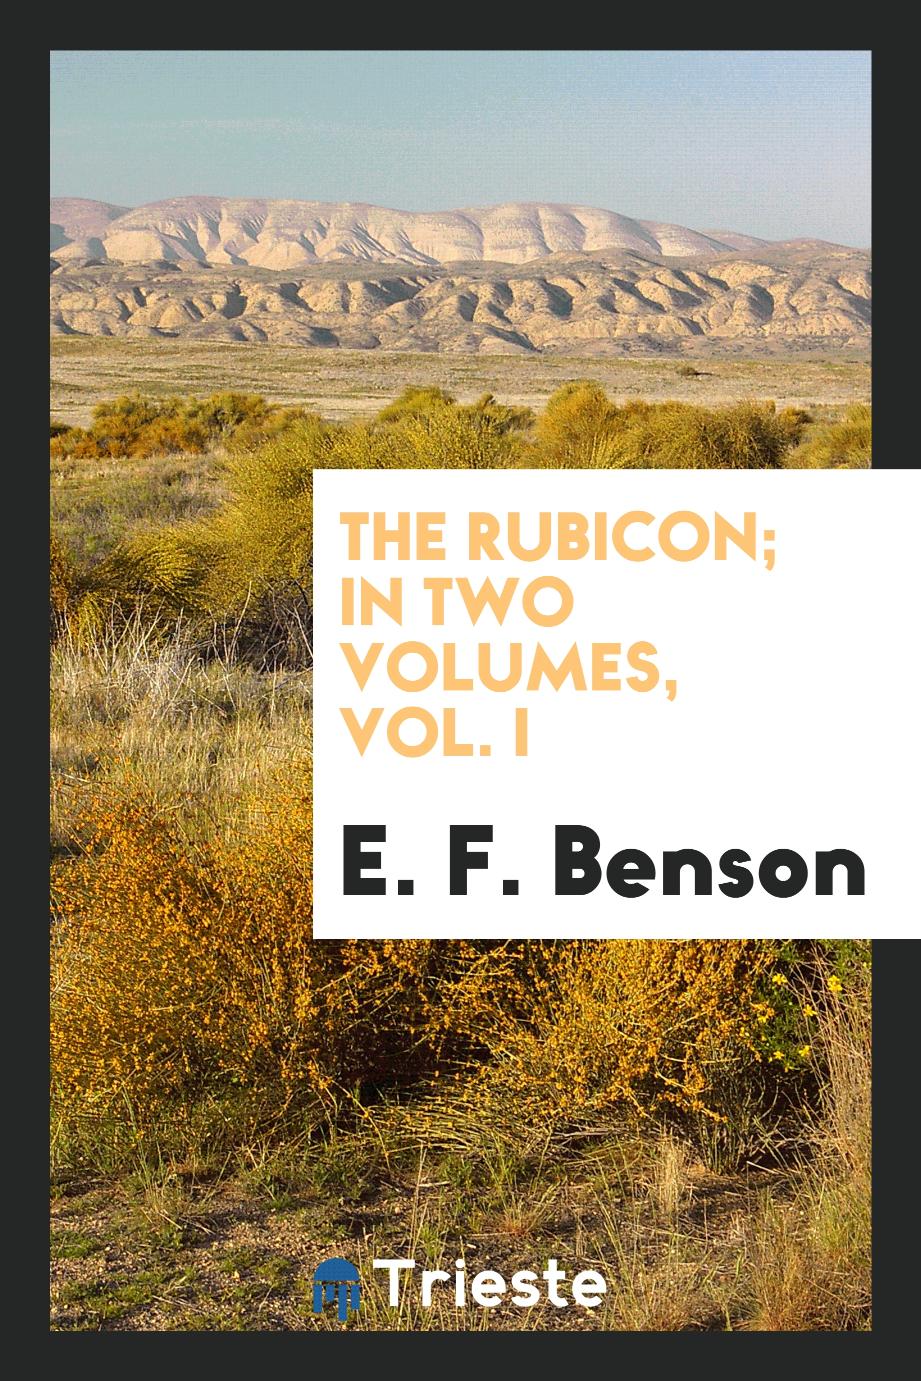 The Rubicon; In two volumes, Vol. I